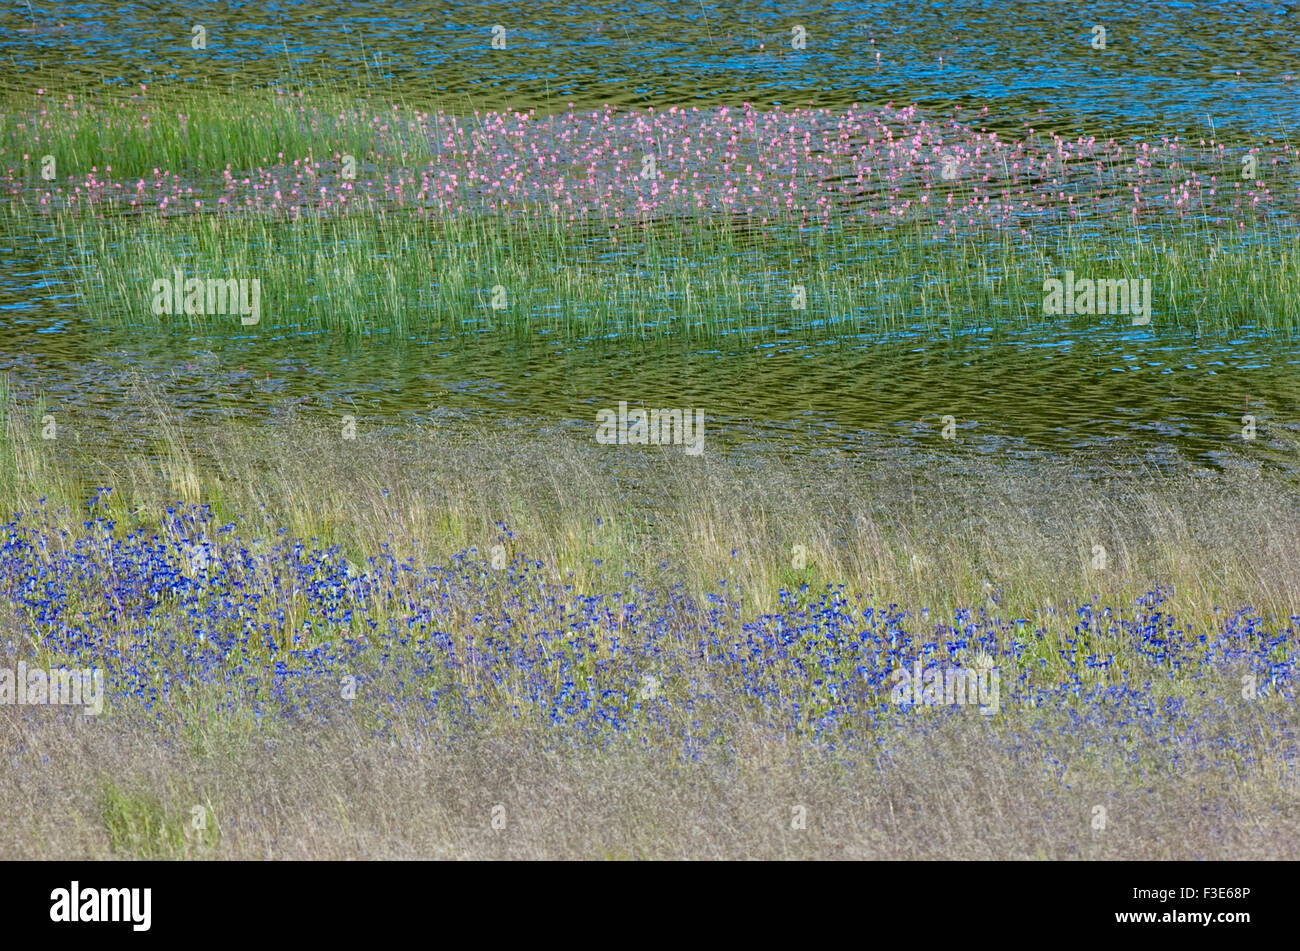 A Montana field and pond with summer flowers. Stock Photo